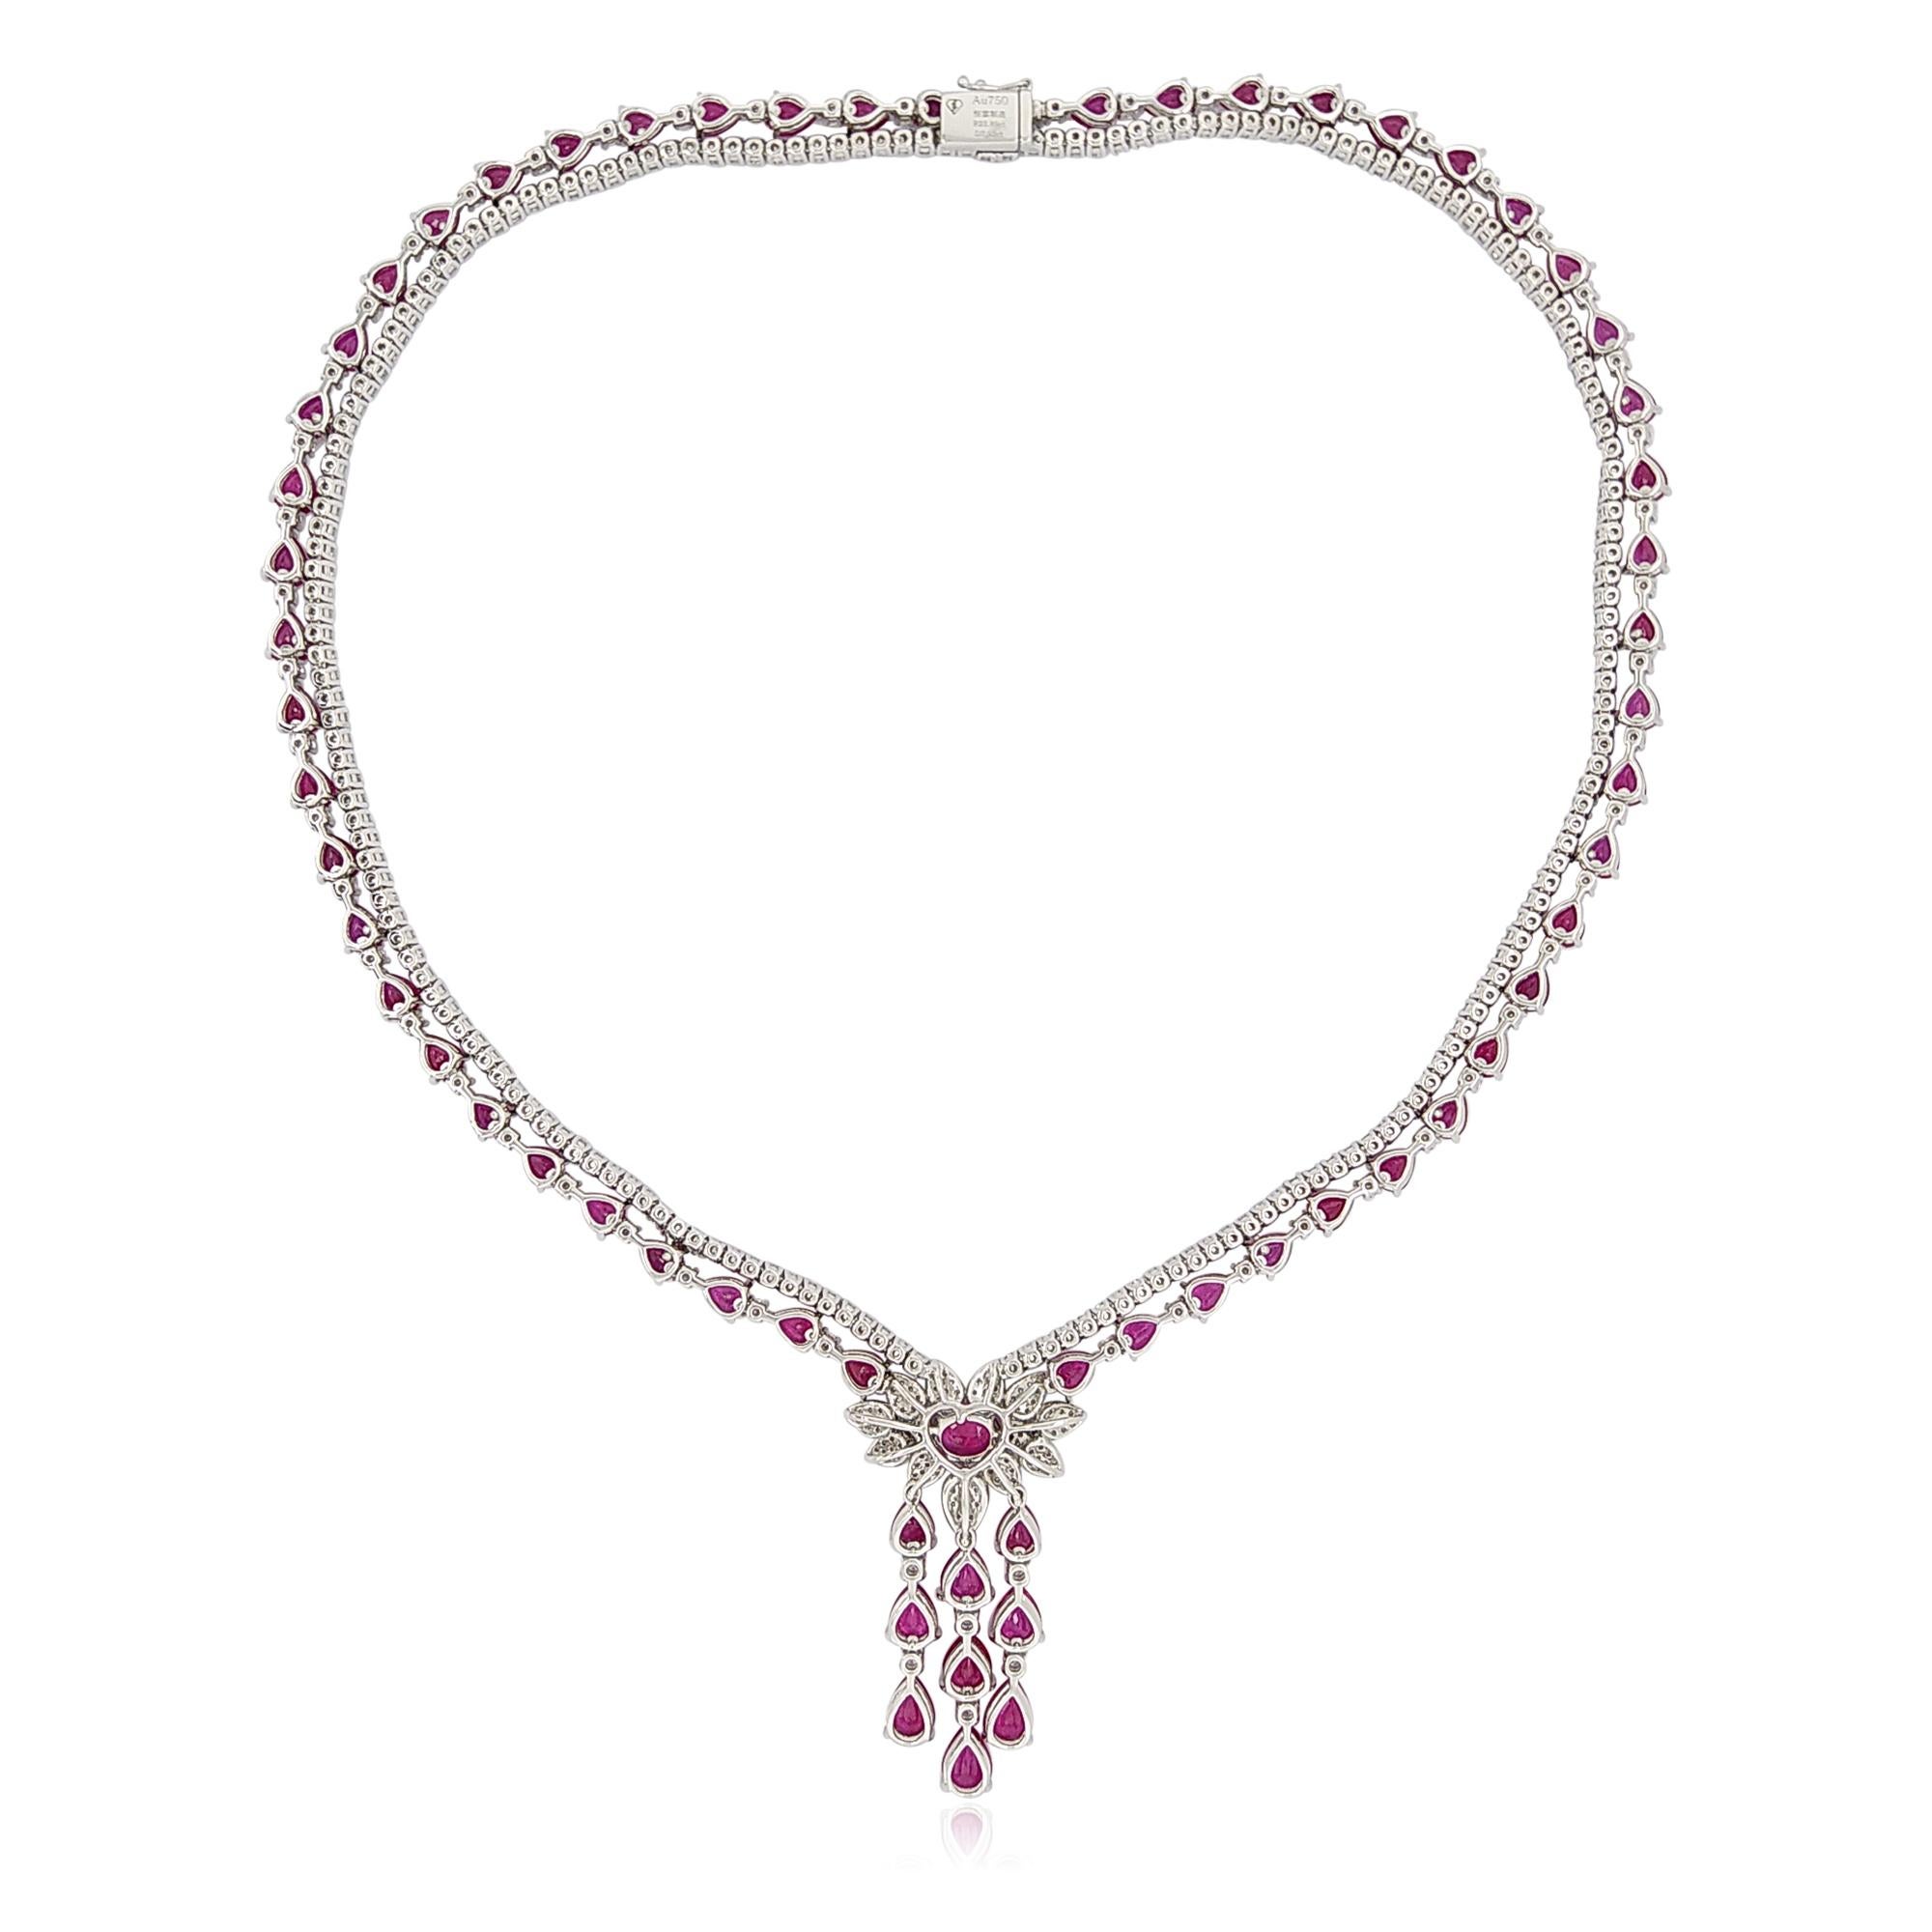 This 18K White Gold necklace features two rows of expertly matched Rubies and White Diamonds, which are perfectly enriched by the rich hues. The red wine colour showcased in this unique necklace makes it truly special. This spectacular necklace will